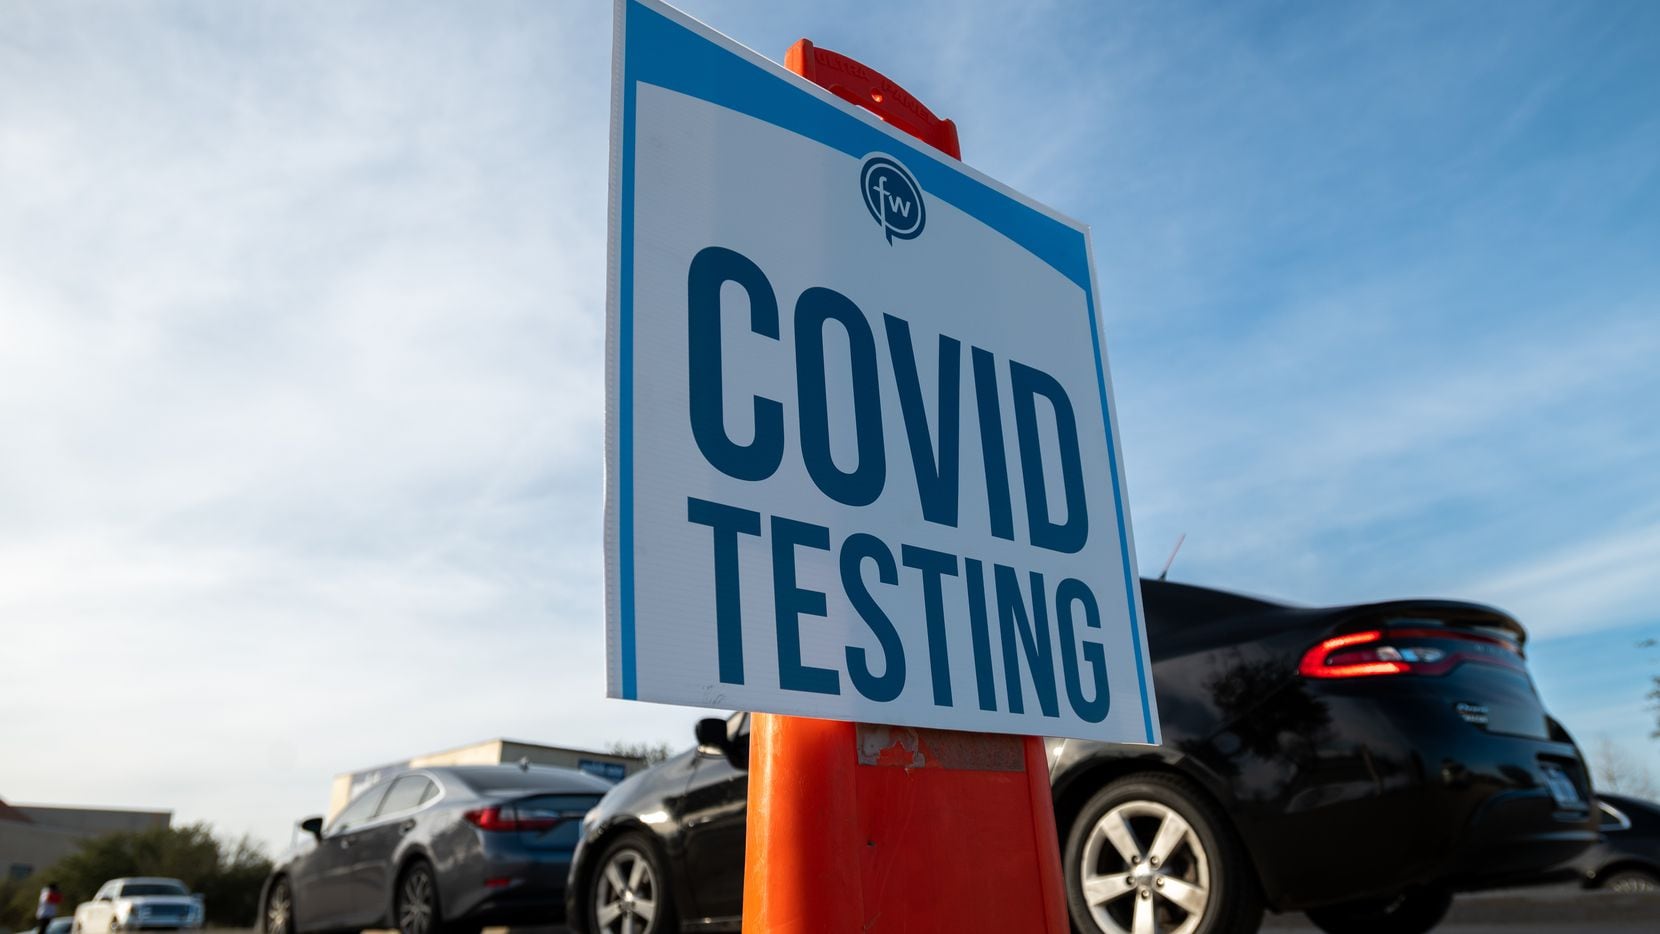 Signage is on display as motorists wait for a COVID-19 test in the parking lot of...